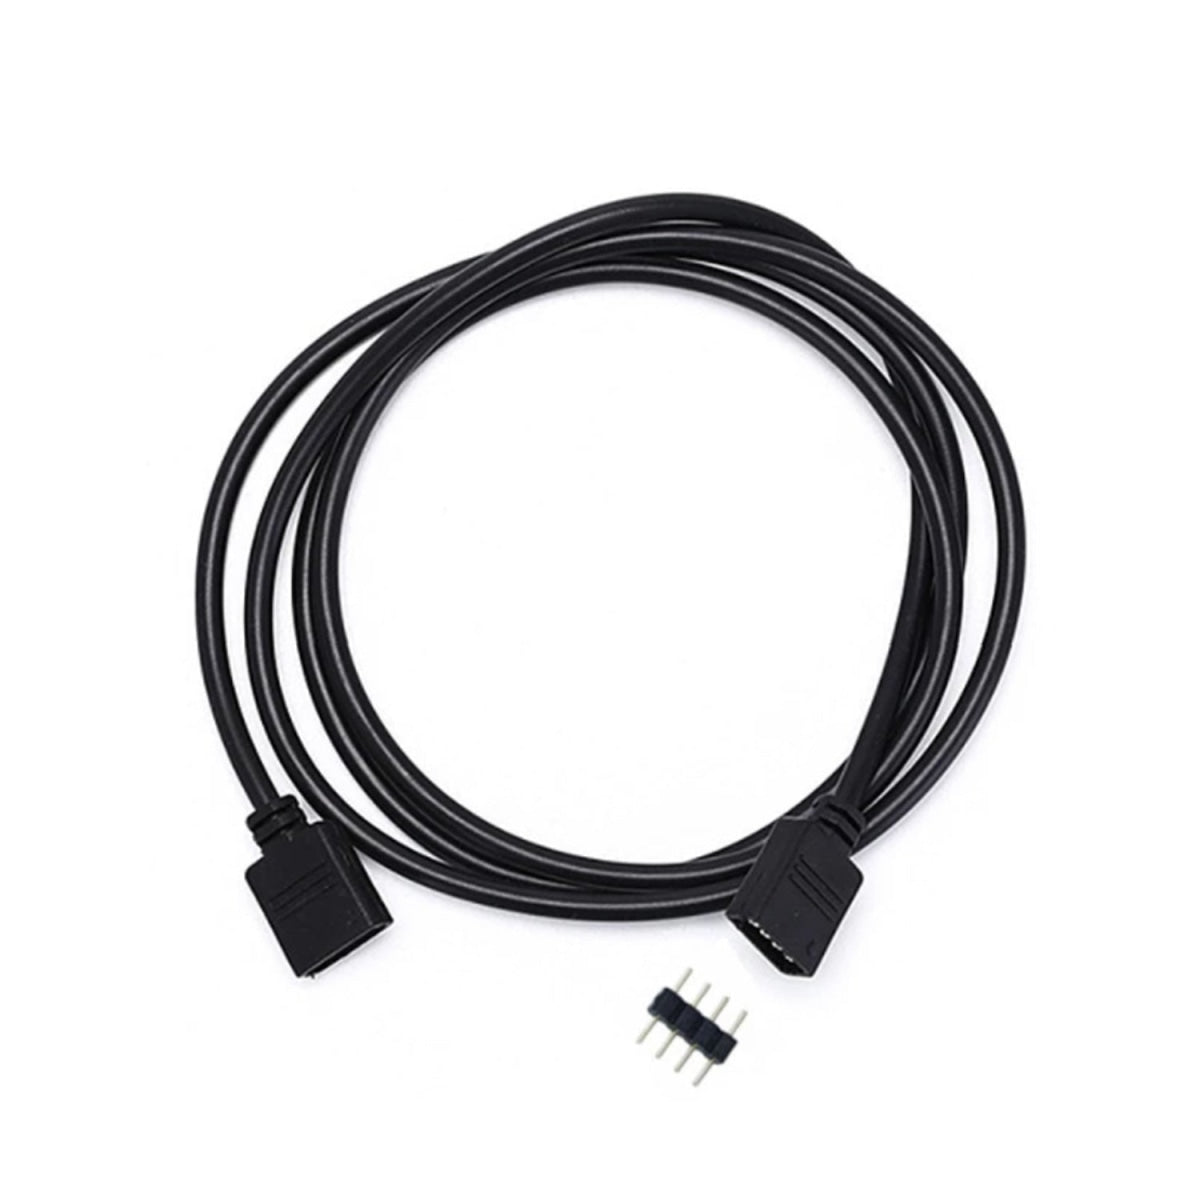 4 Pin / 5 Extension Cable Connector Rgb Rgbw 5050 3528 Led Strip Light 30Cm Black Cables -